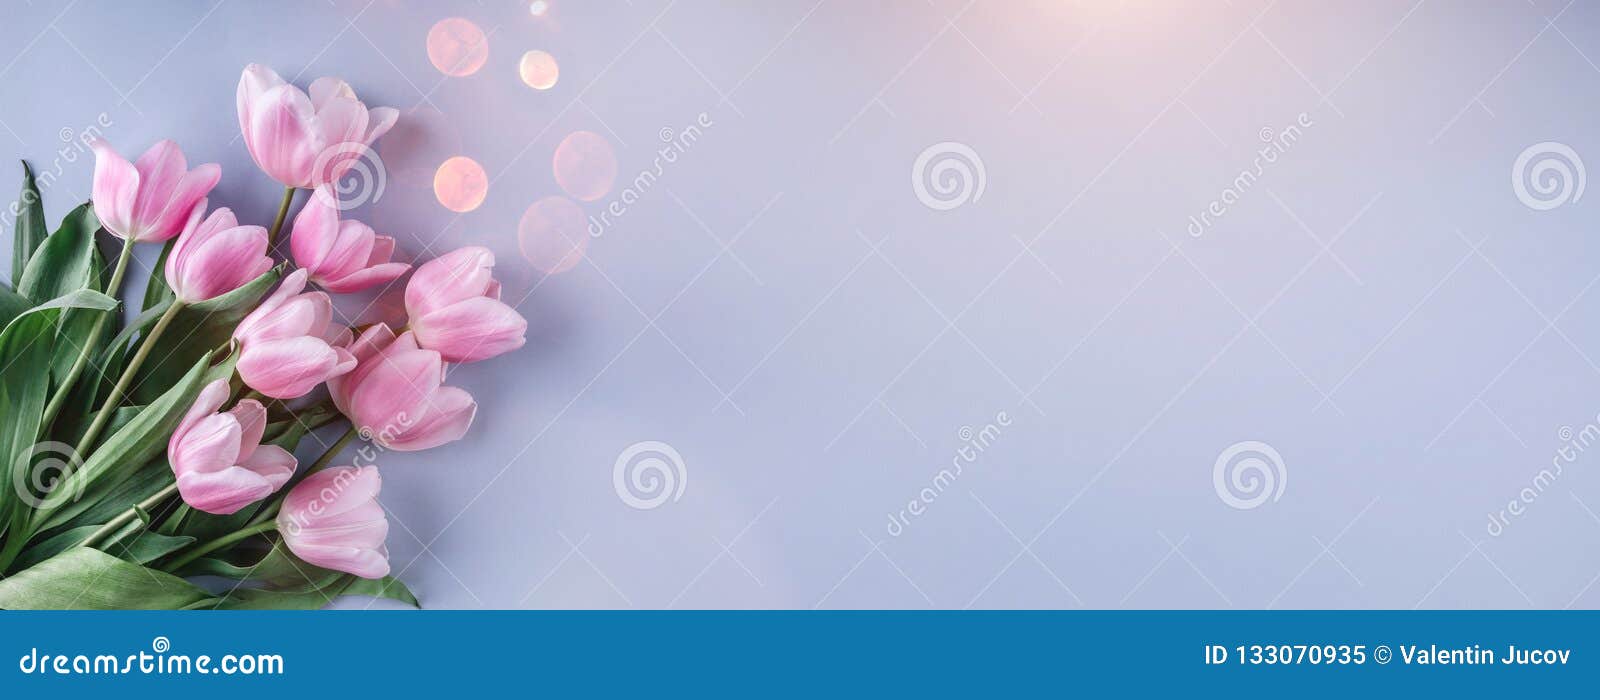 bouquet of pink tulips flowers over light blue background. greeting card or wedding invitation